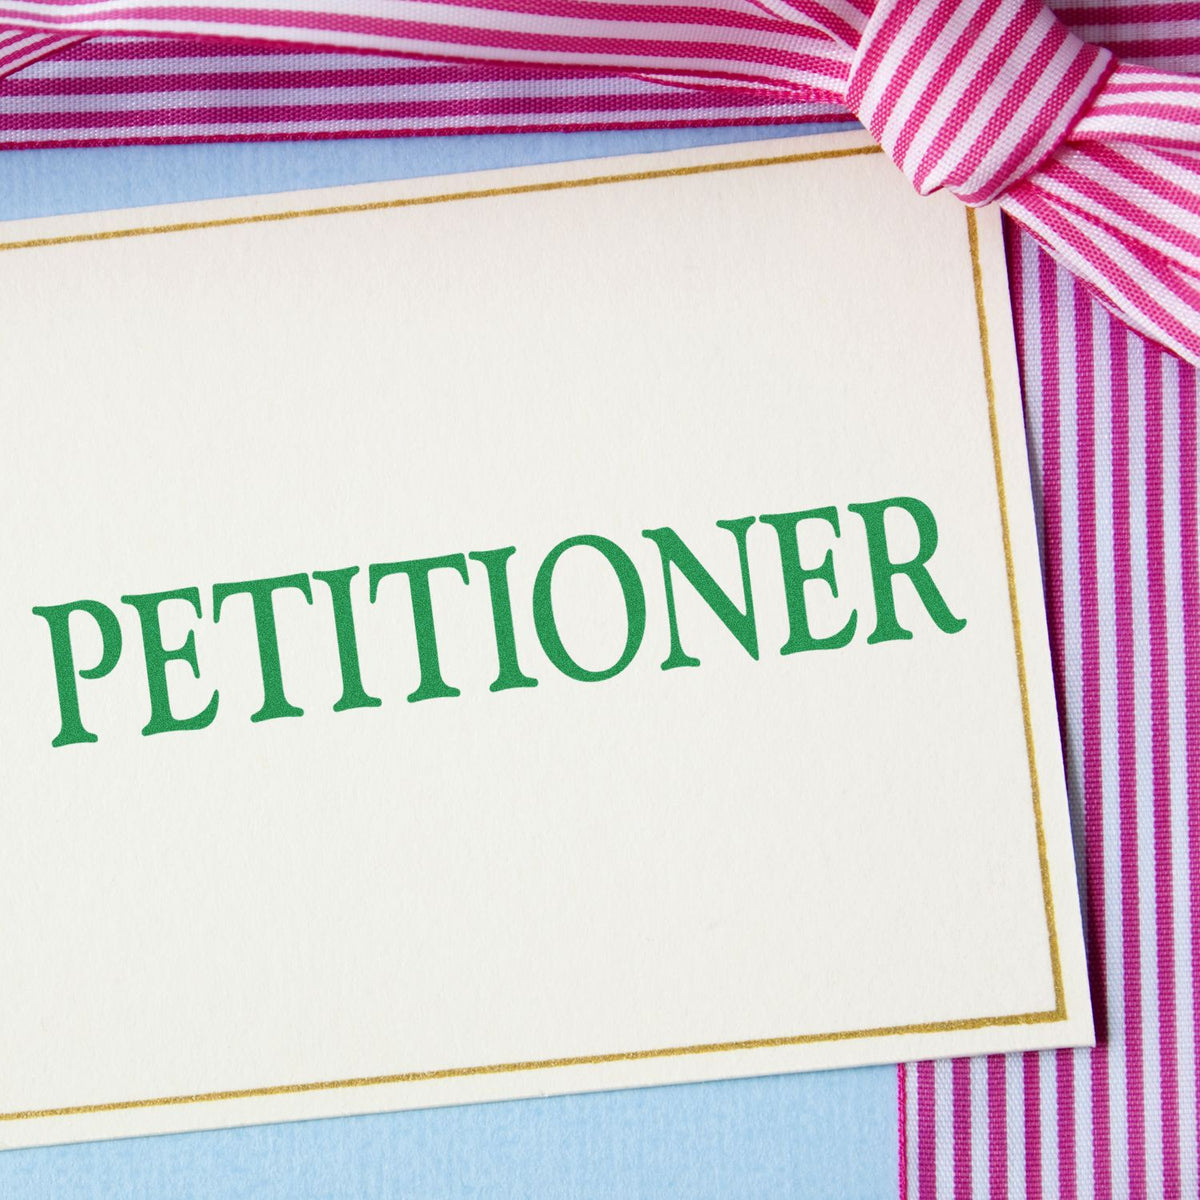 Large Petitioner Rubber Stamp In Use